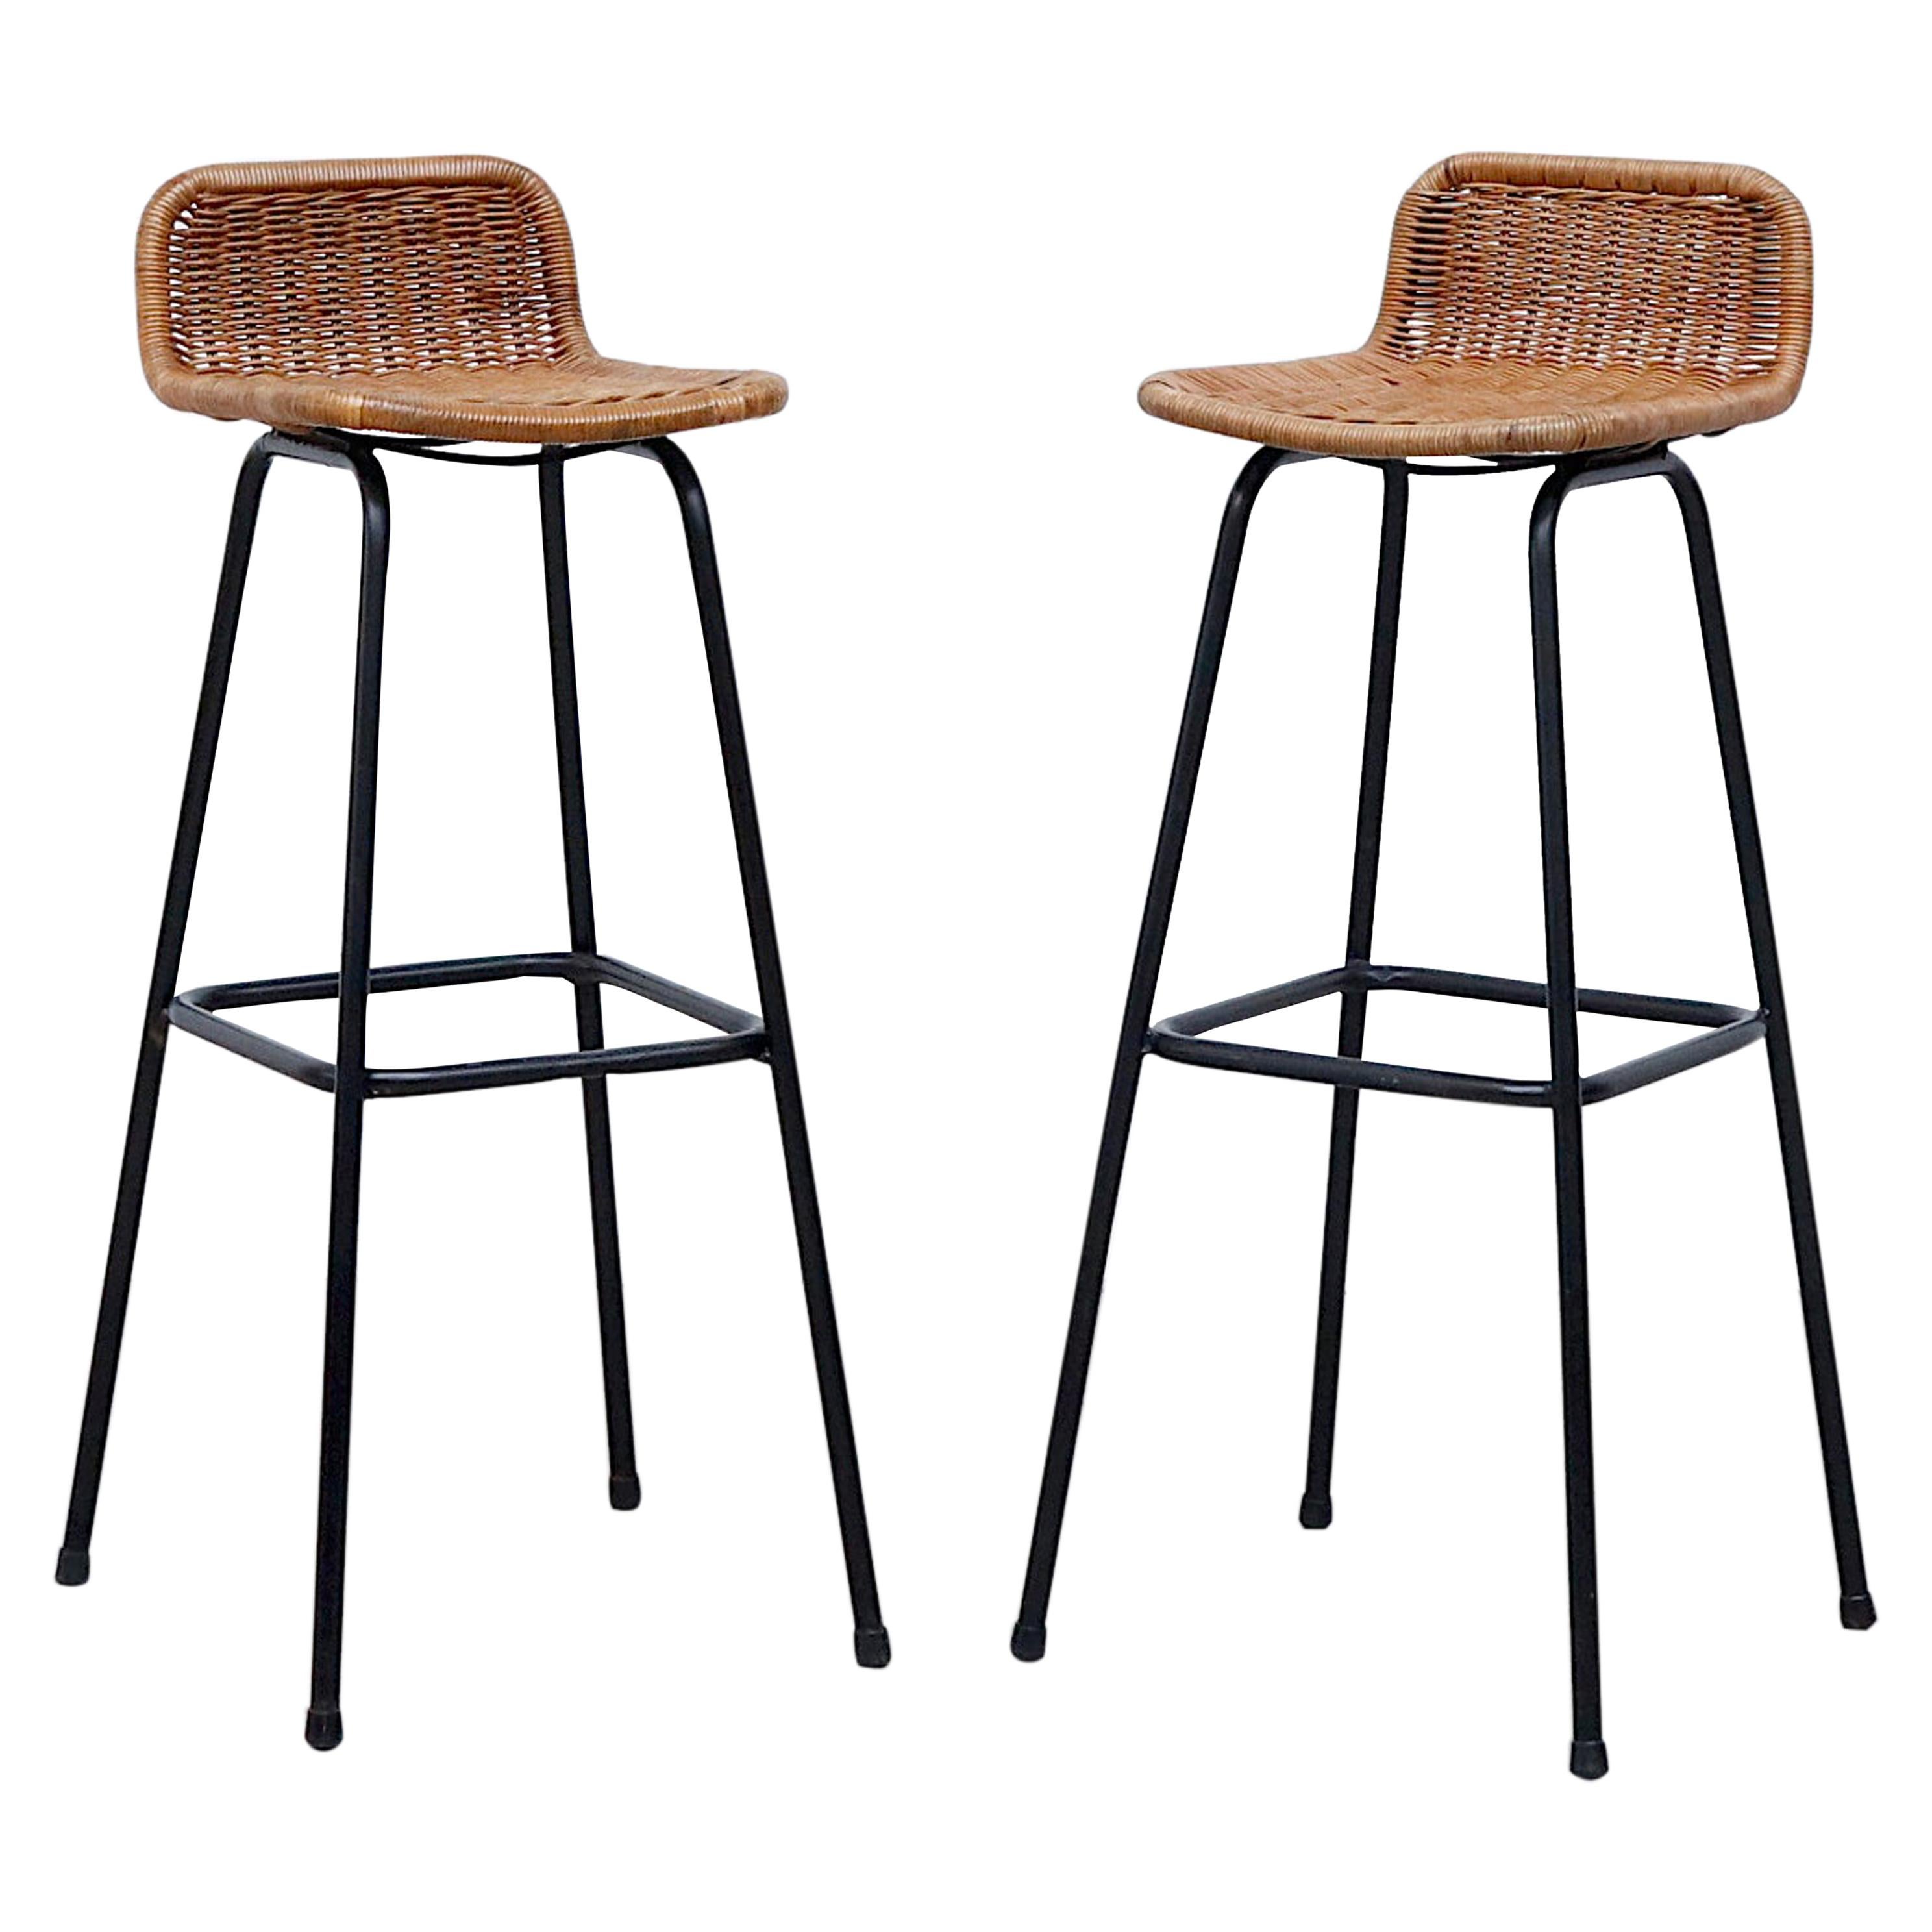 Set Of 4 Wicker Bar Stools In The Style, Wicker Bar Stools